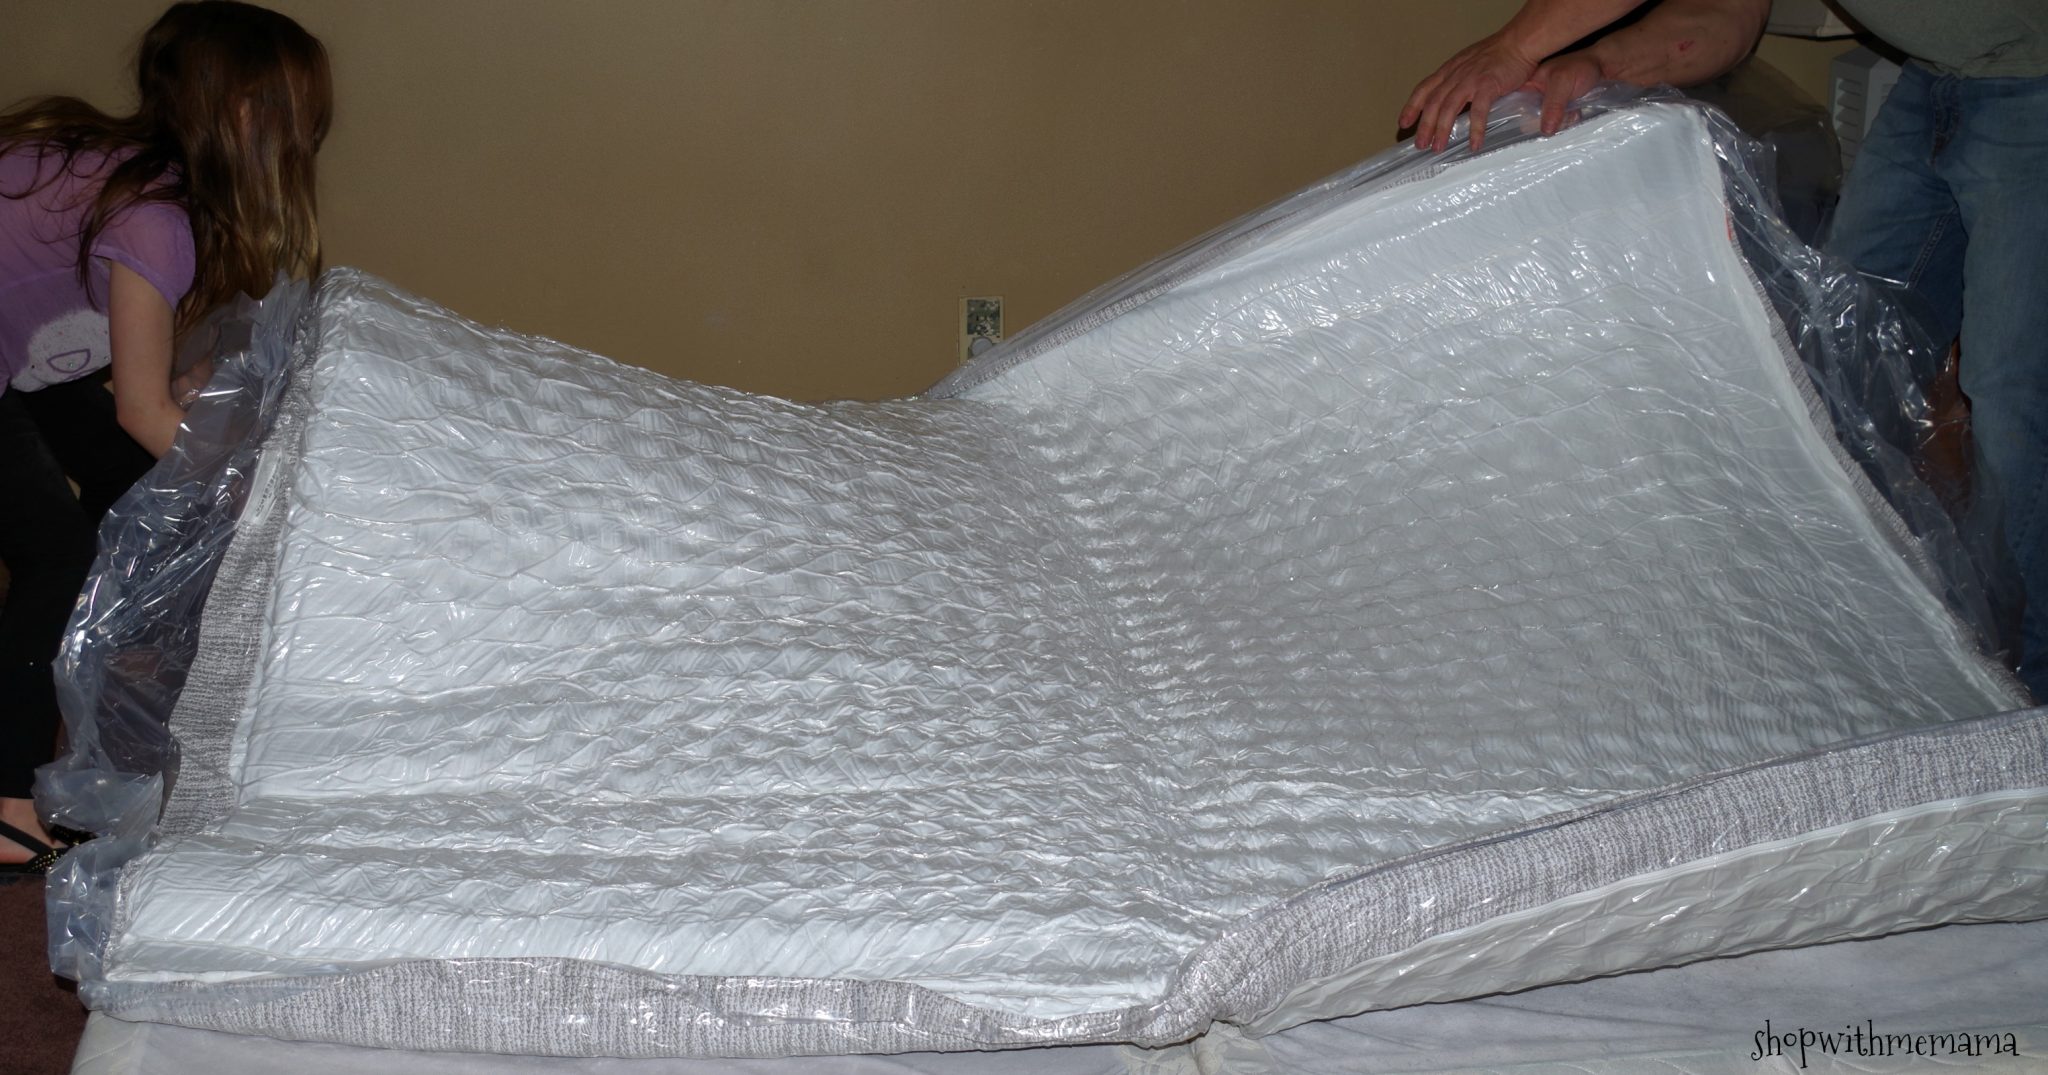 The Highest Rated Hybrid Mattress On The Internet